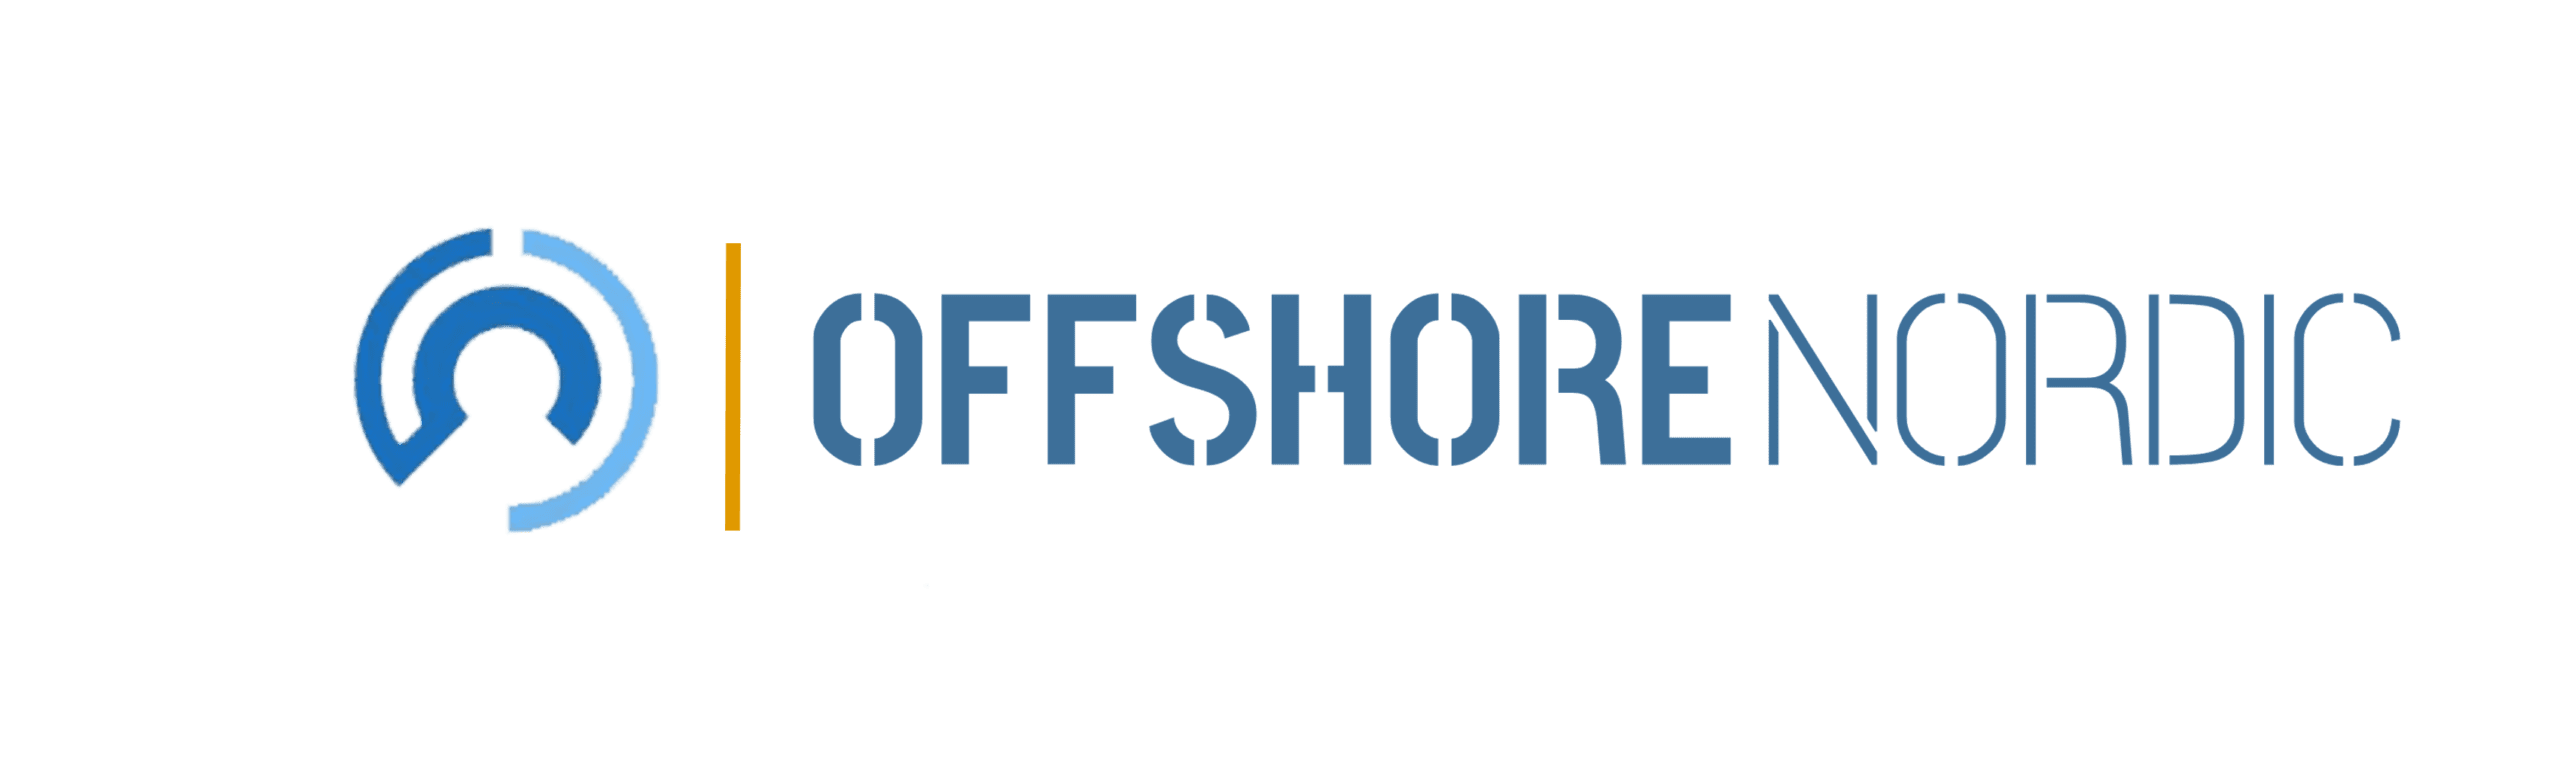 Offshore & Maritime Jobs | Career at sea